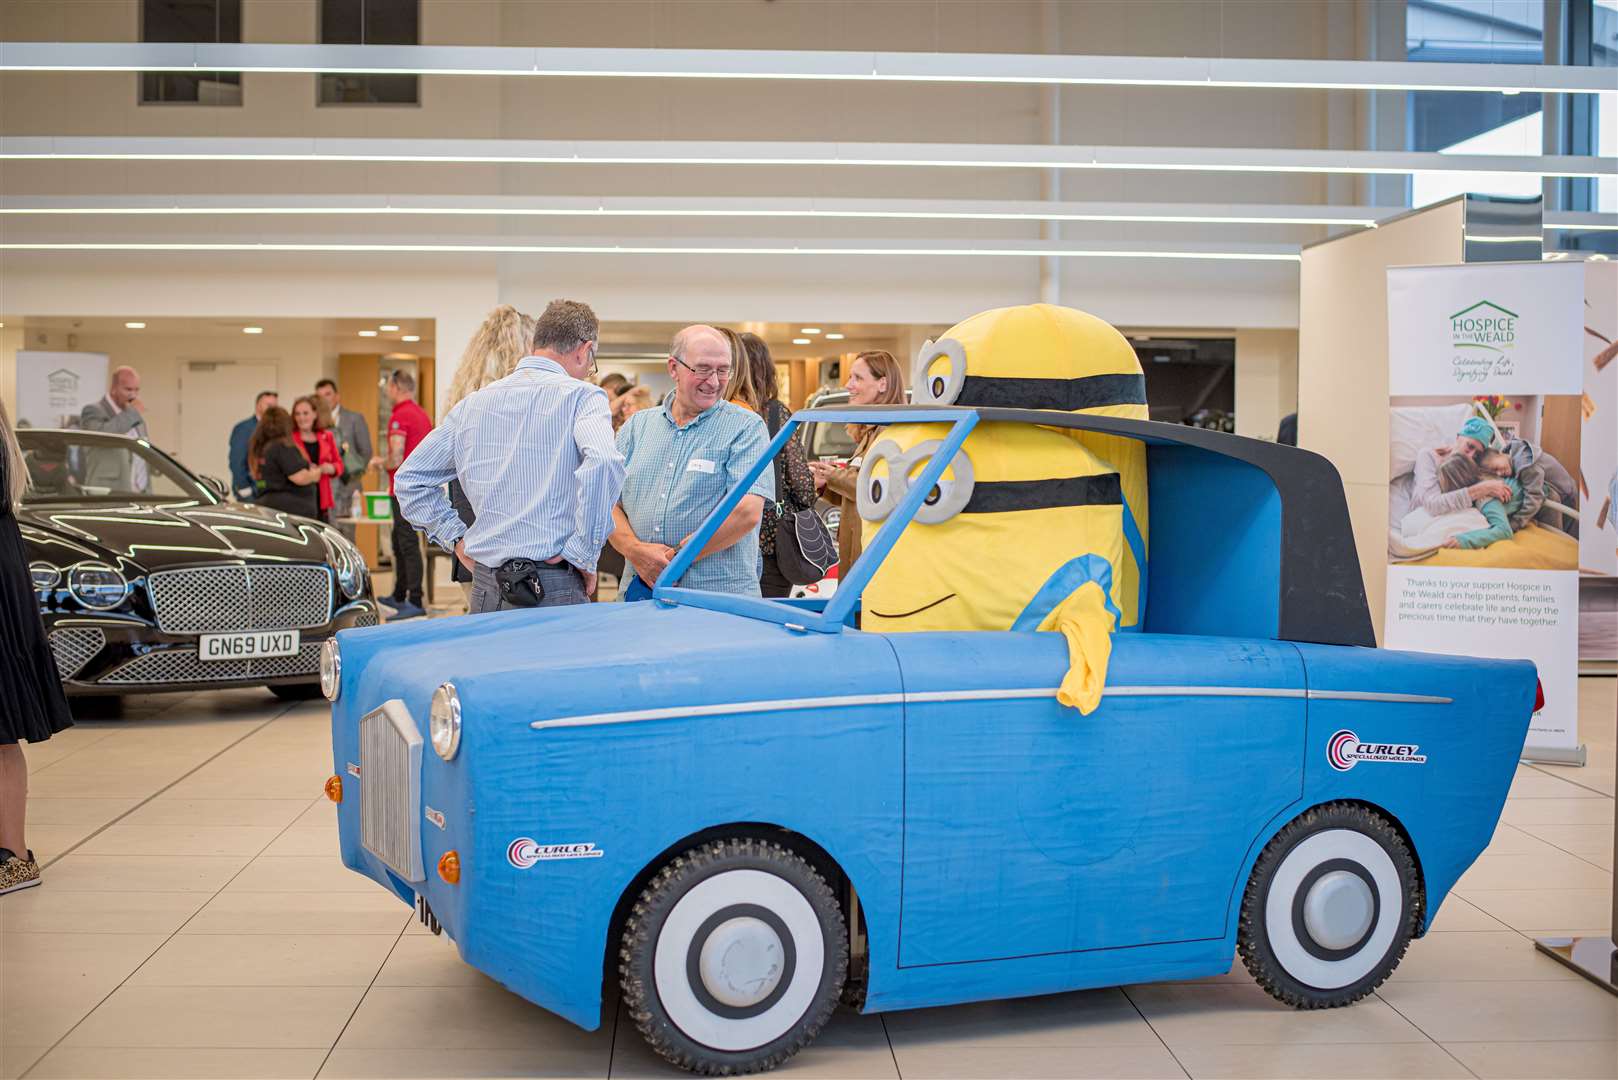 The Minion Kart which was entered by Taylor Made Dreams in the 2019 races